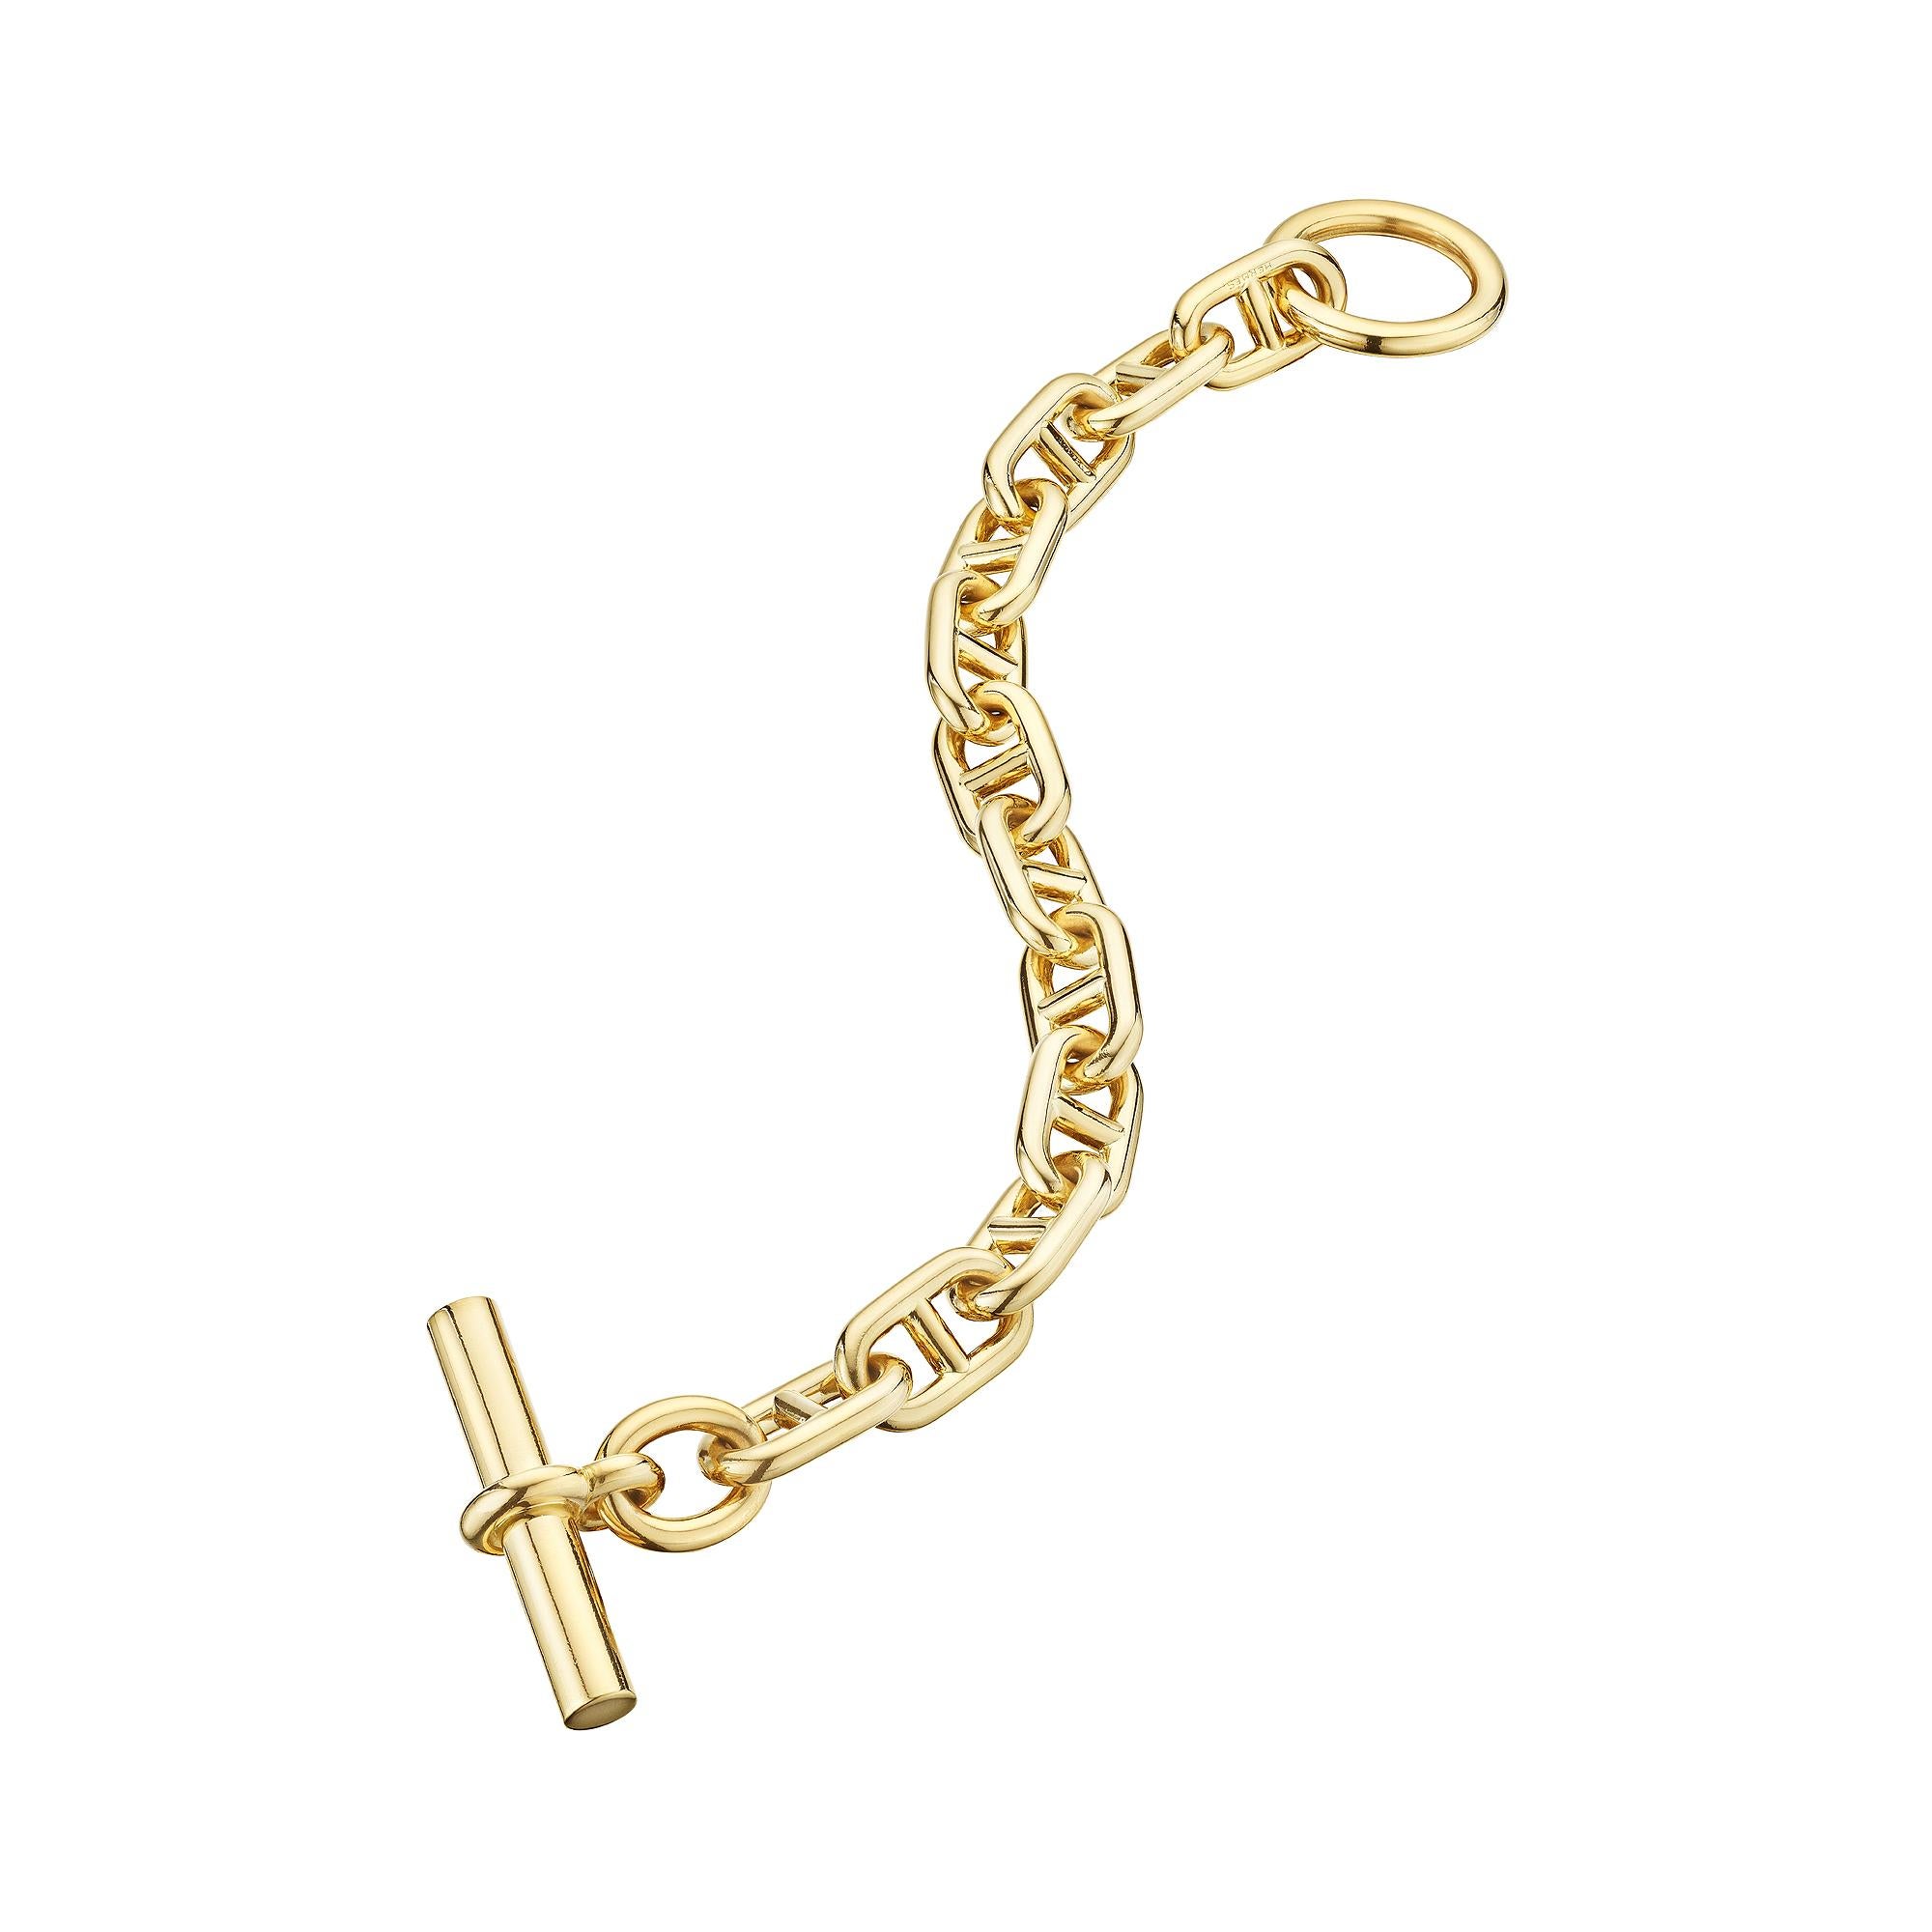 Bold and uncompromising this Hermes Paris modernist 'chaine d'ancre' toggle large link bracelet is the statement piece you have been searching for.  With 12 links weighing 110 grams, this polished 18 karat yellow gold bracelet is extraordinarily